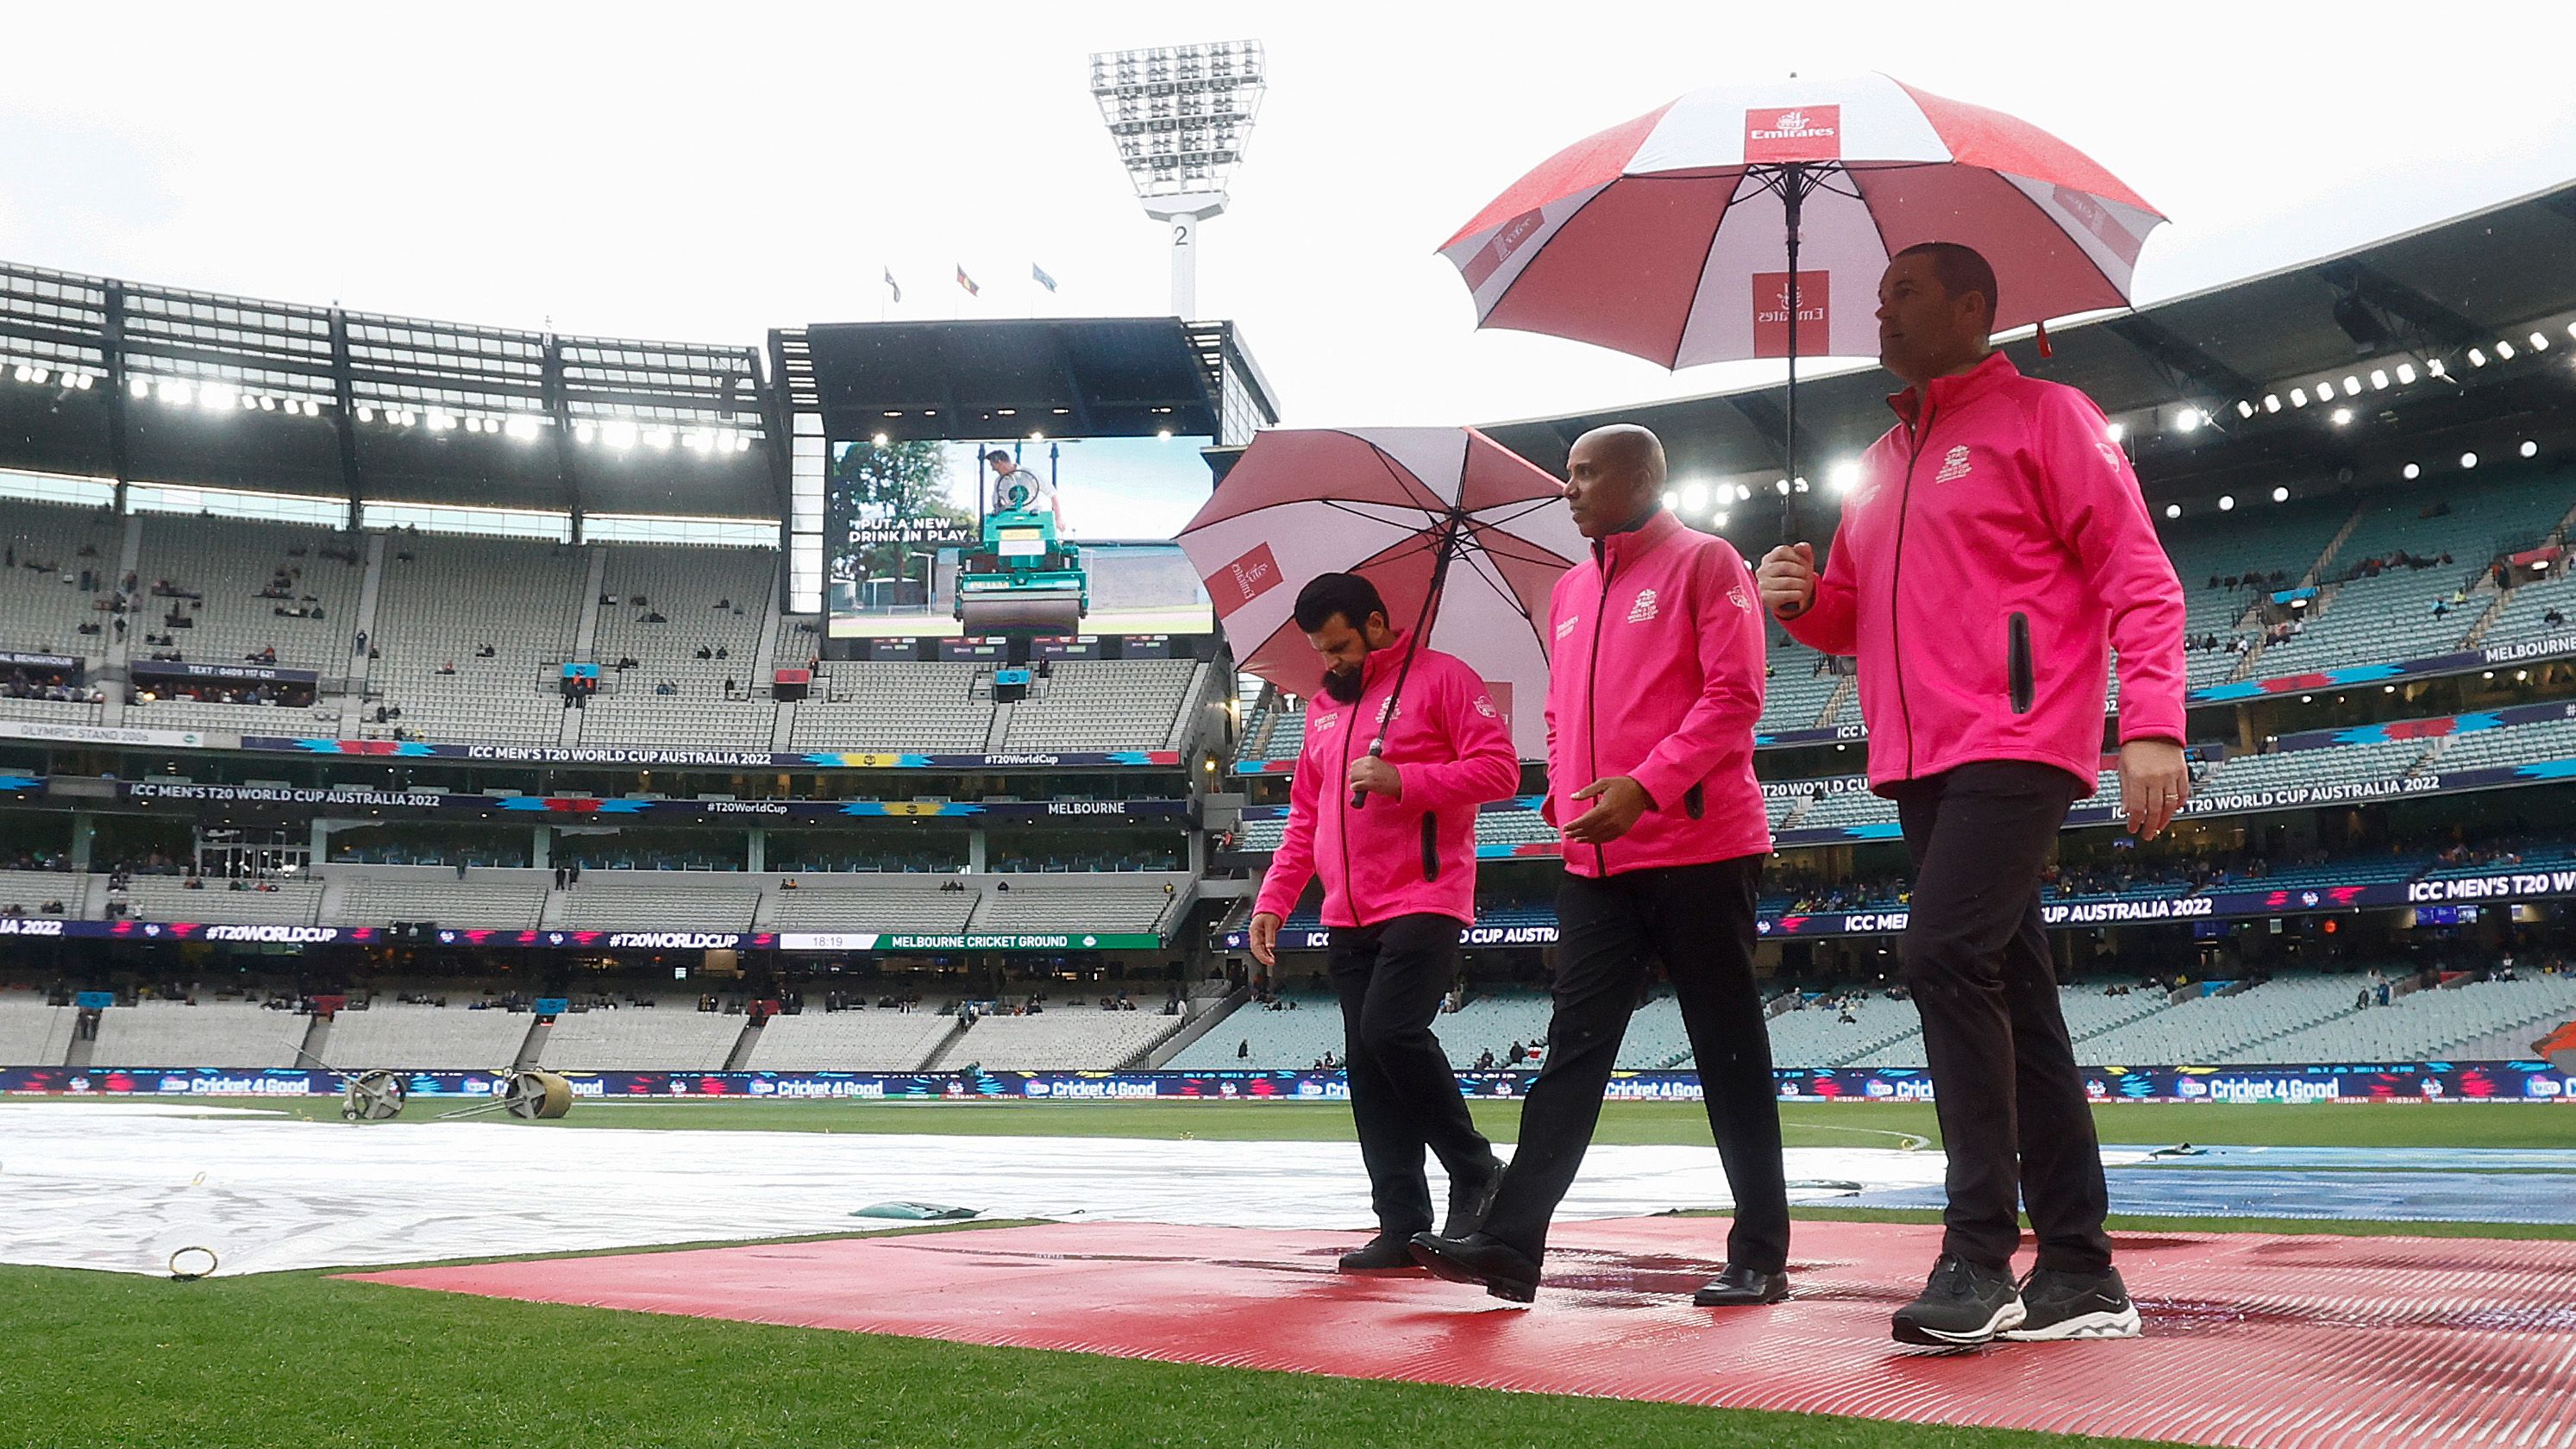 T20 World Cup organisers could award joint winners amid dire Melbourne weather forecast